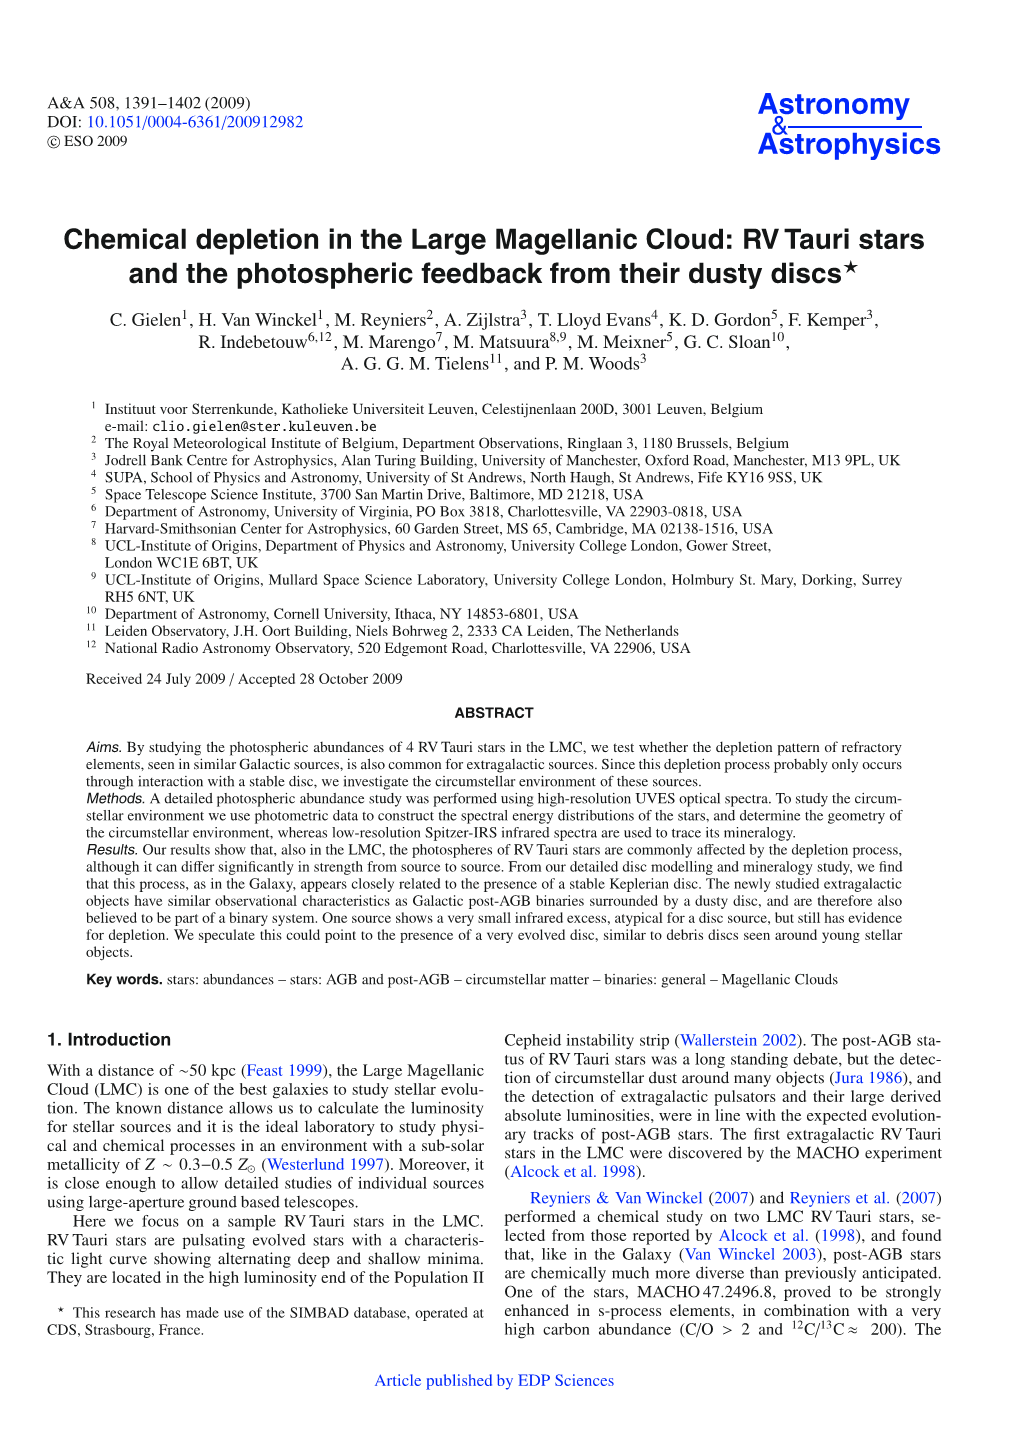 Chemical Depletion in the Large Magellanic Cloud: RV Tauri Stars and the Photospheric Feedback from Their Dusty Discs